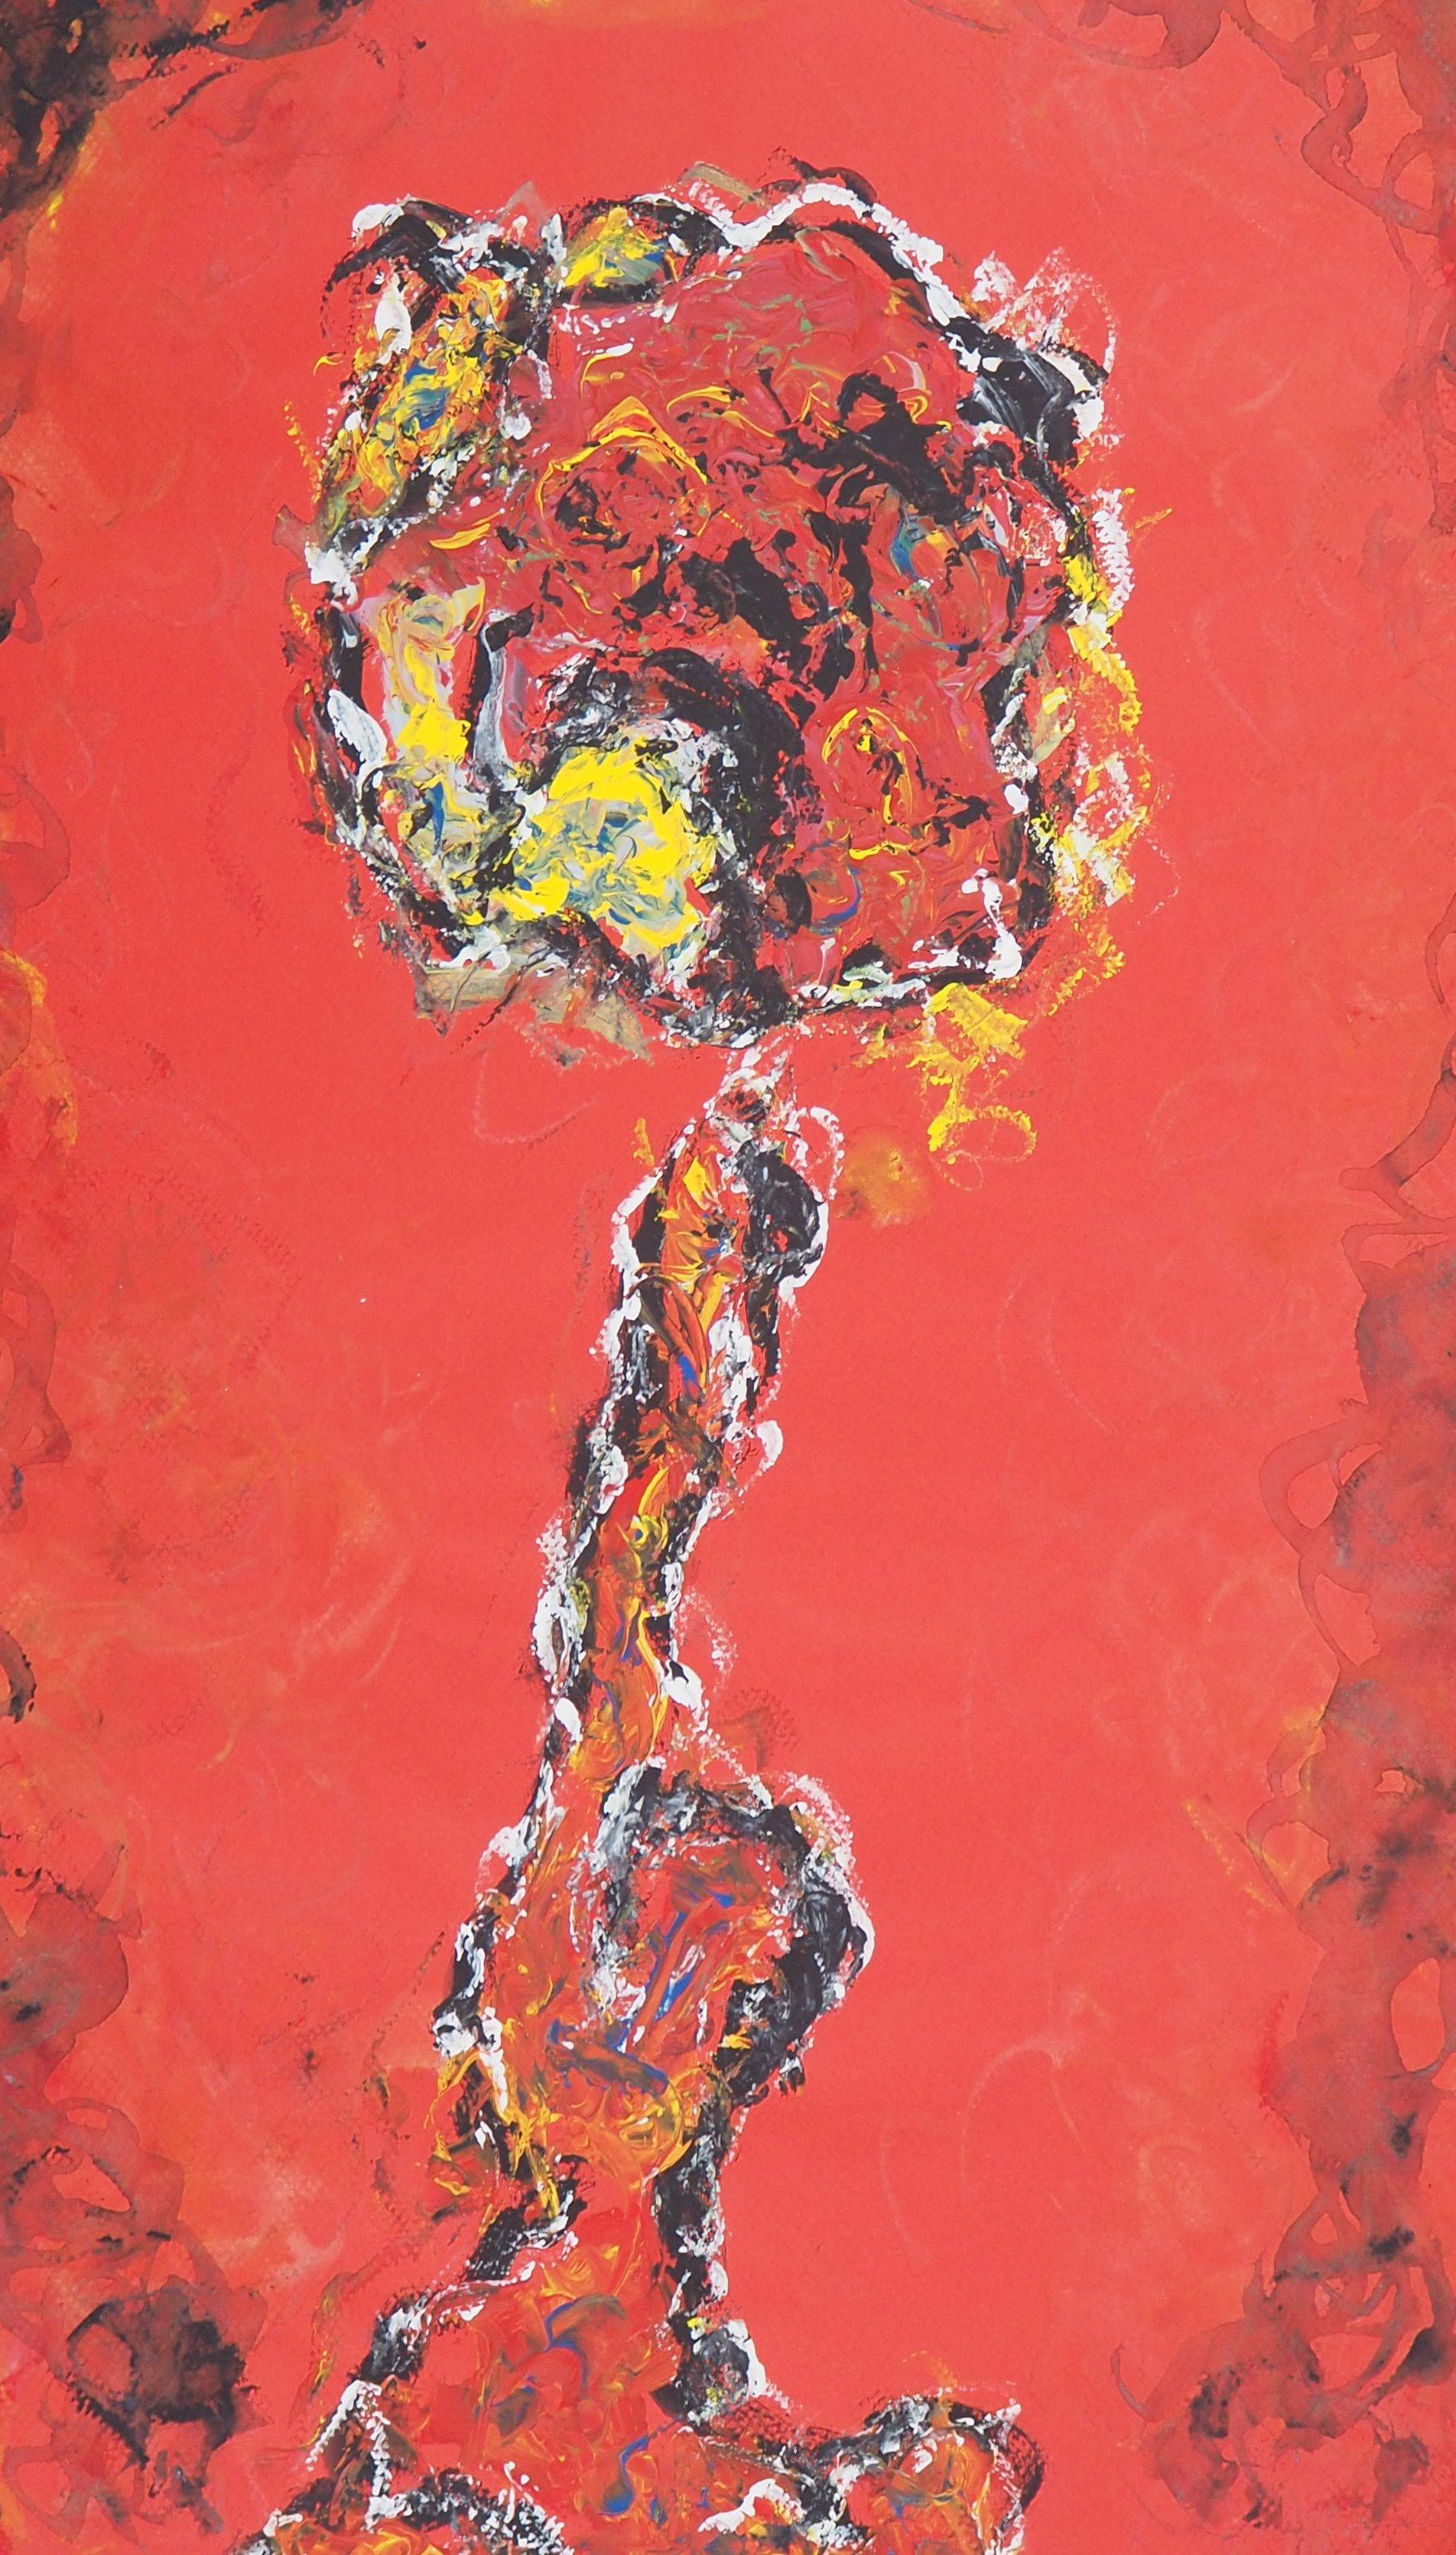 Fauvist rose - original hand signed gouache painting, 1997 - Painting by Michel Guignard